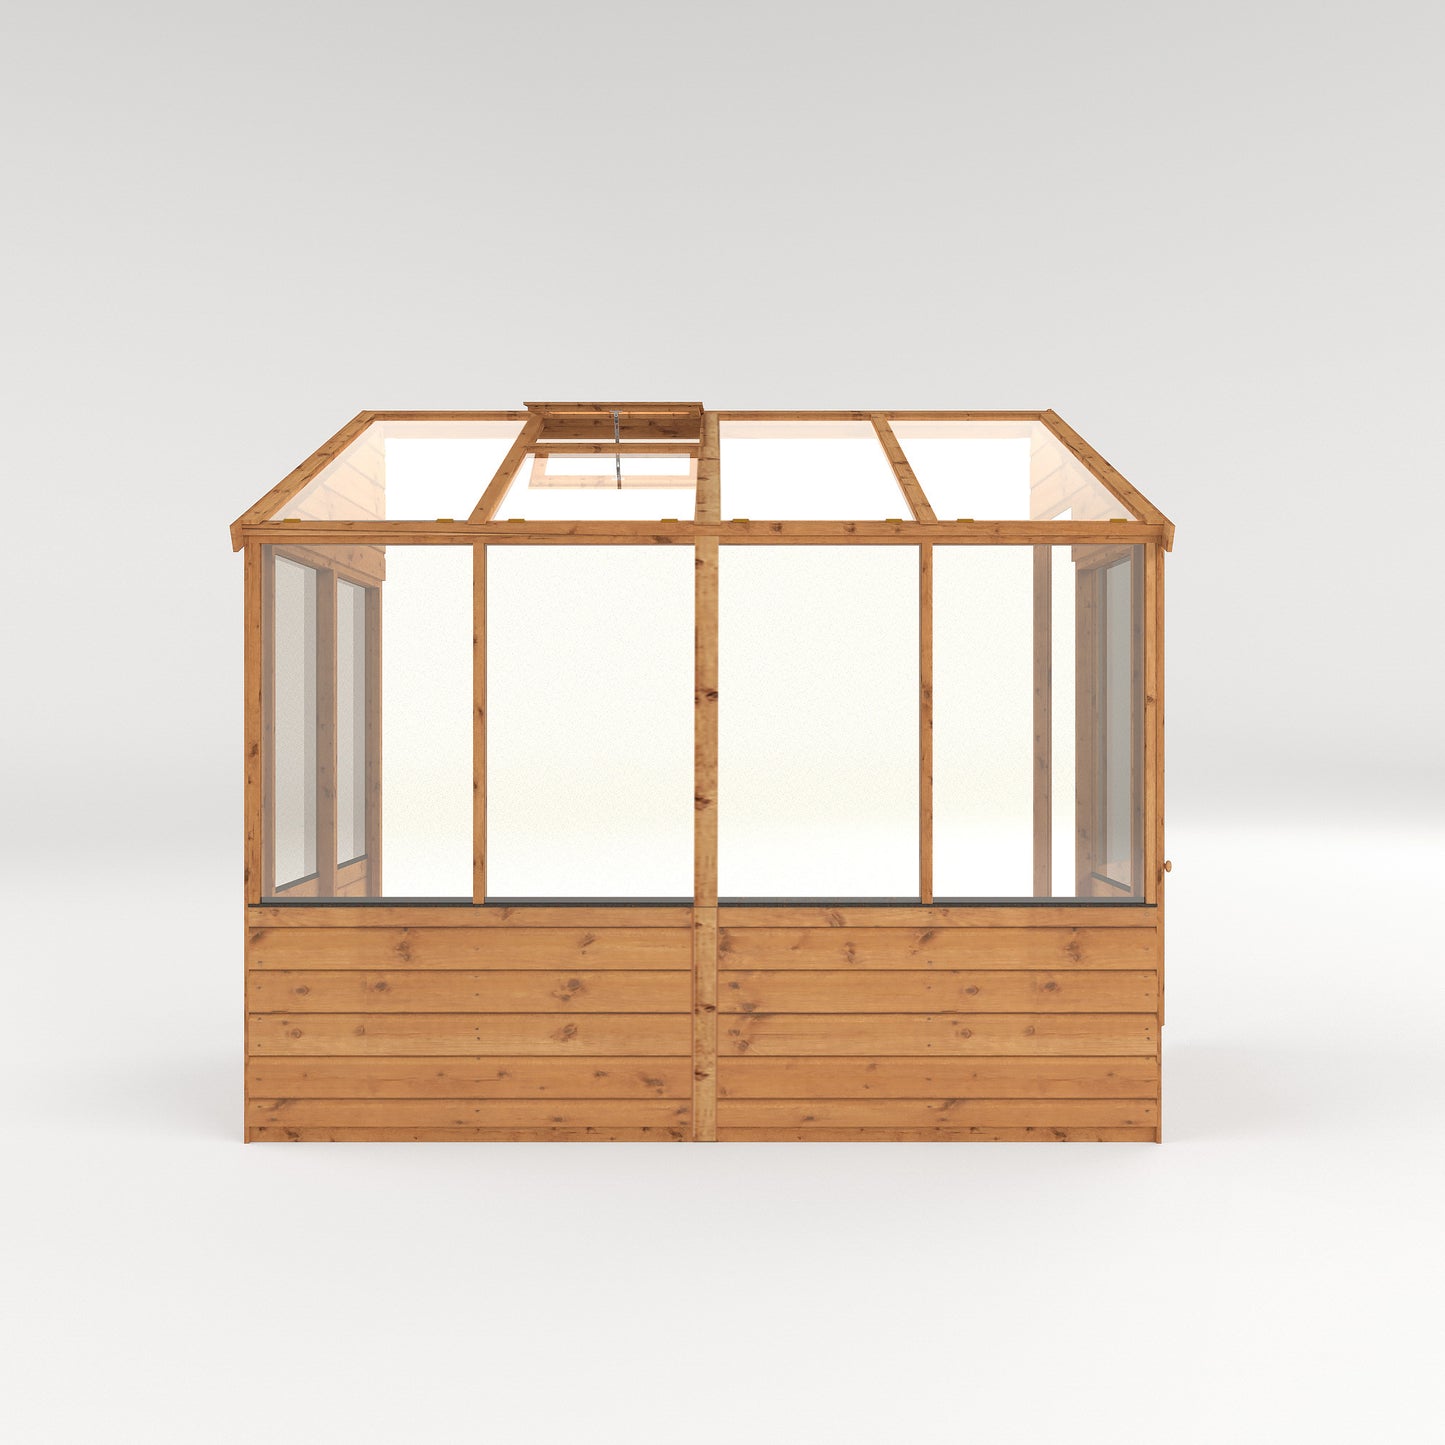 8 x 4 Evesham Lean-to Pent Wooden Greenhouse